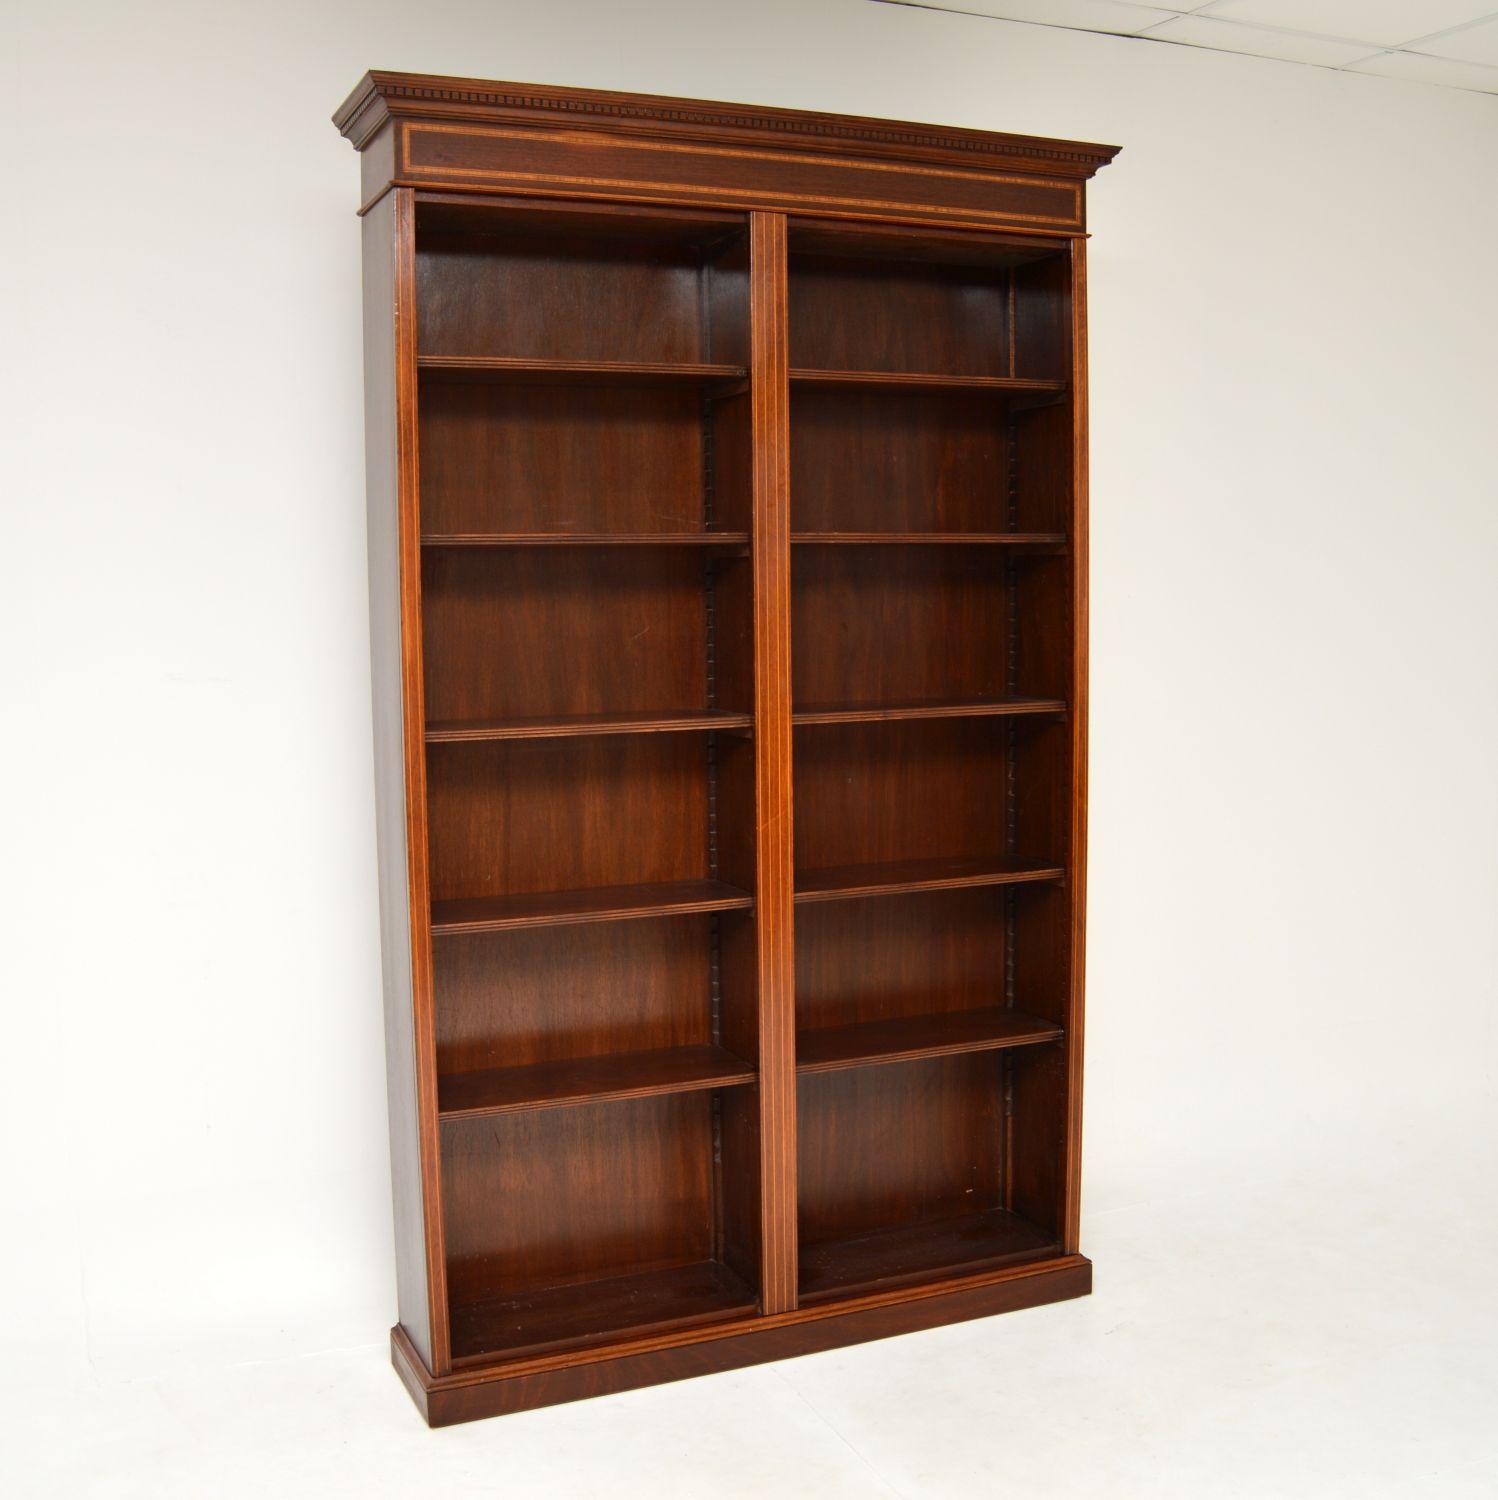 A beautiful and impressive antique open bookcase in the Sheraton style. This was made in England, it dates from around the 1950’s.

It is very well made and of superb quality. The wood has a lovely colour tone and patina, there is stunning satinwood